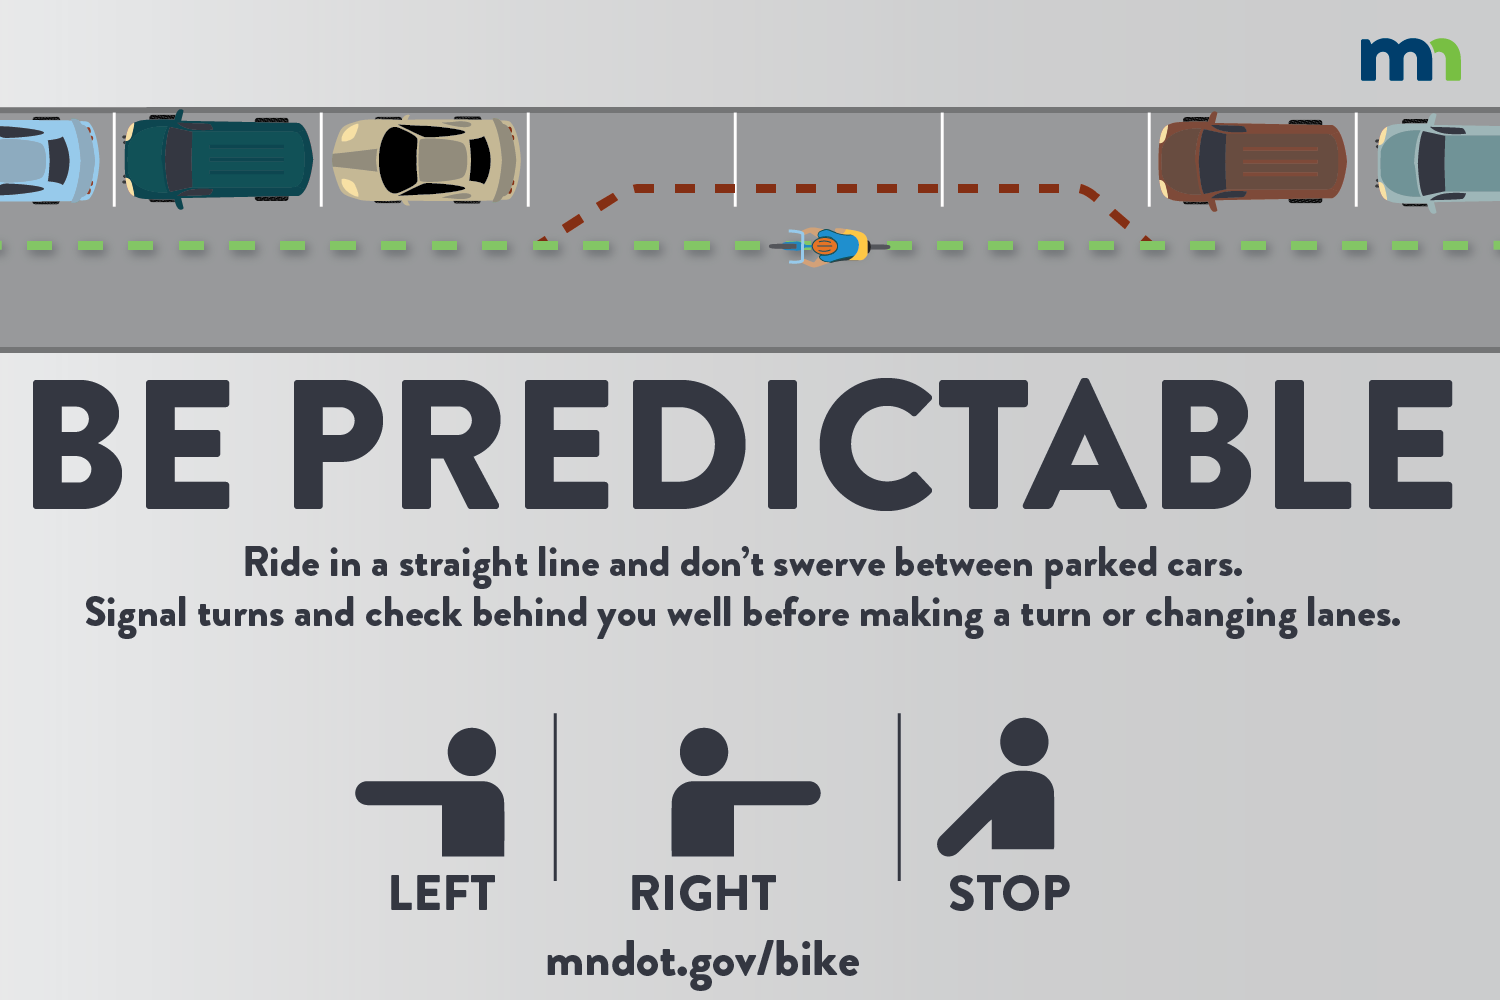 Be predictable:  If you bike, ride in a straight line and don’t swerve between parked cars. Signal your turns and check behind you as well before making a turn or changing lanes.